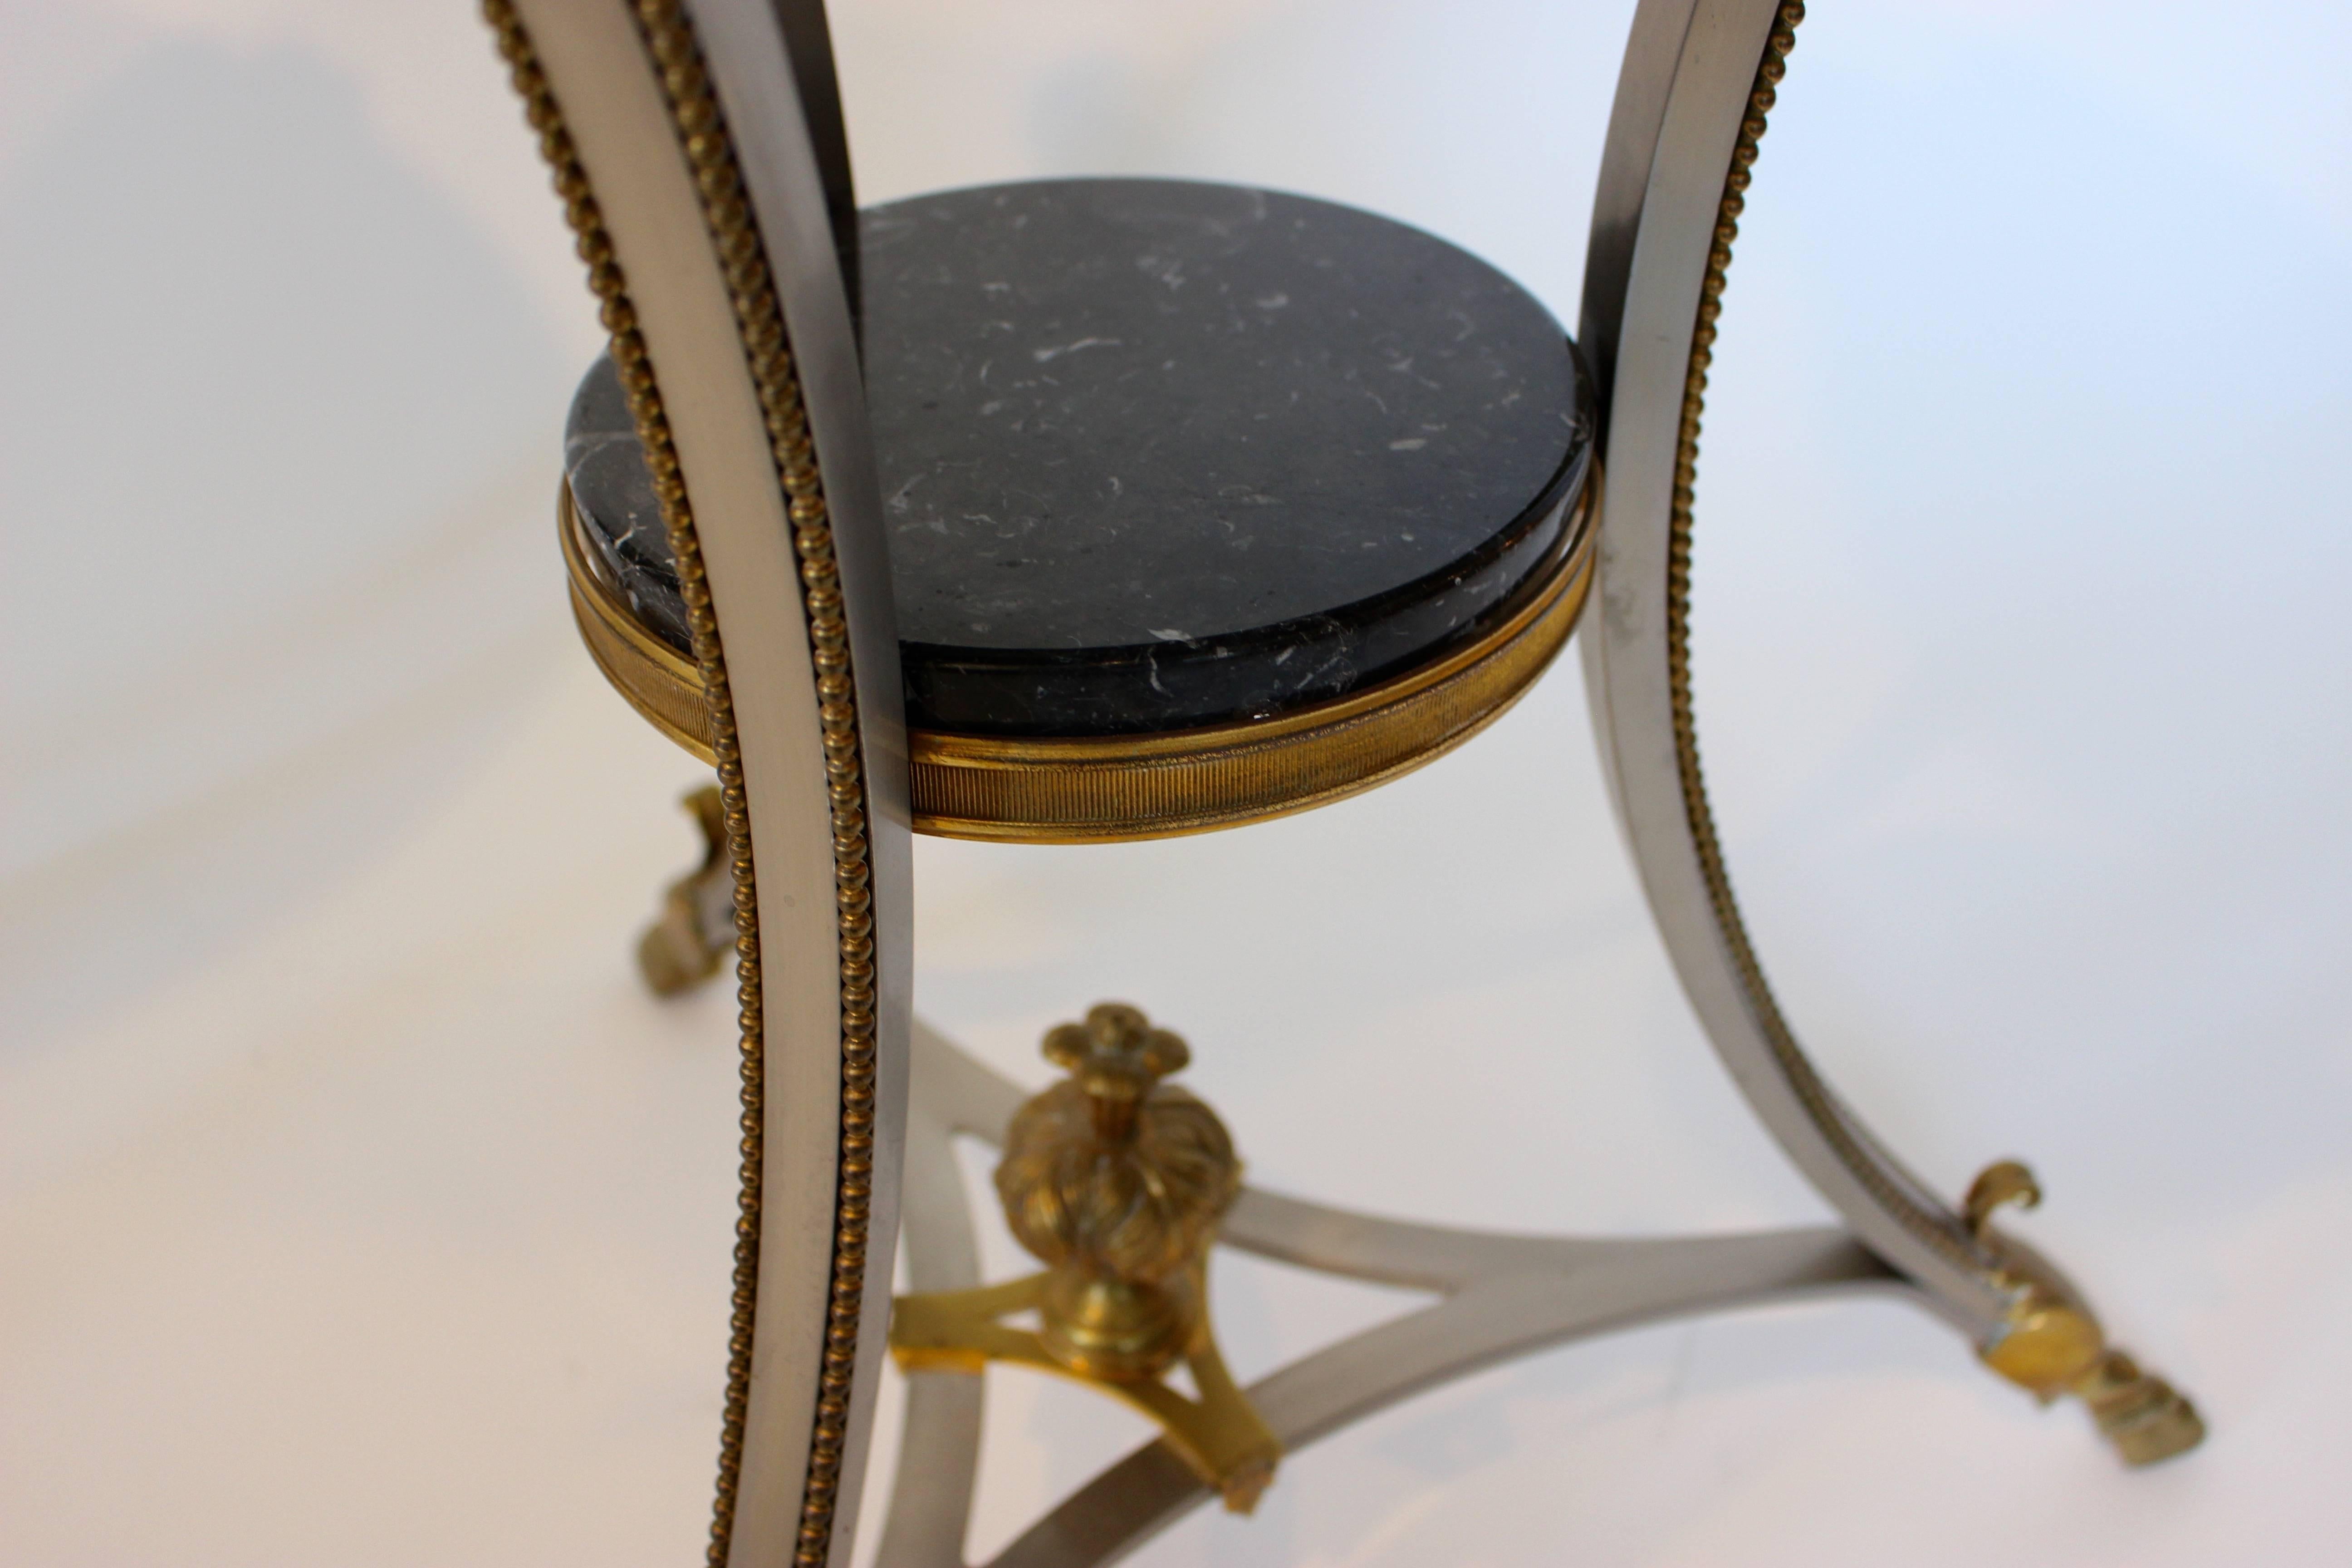 Pair of Ormolu and Metal Guéridon Tables with Black Marble Top and Ram’s Masks In Good Condition For Sale In Palm Desert, CA